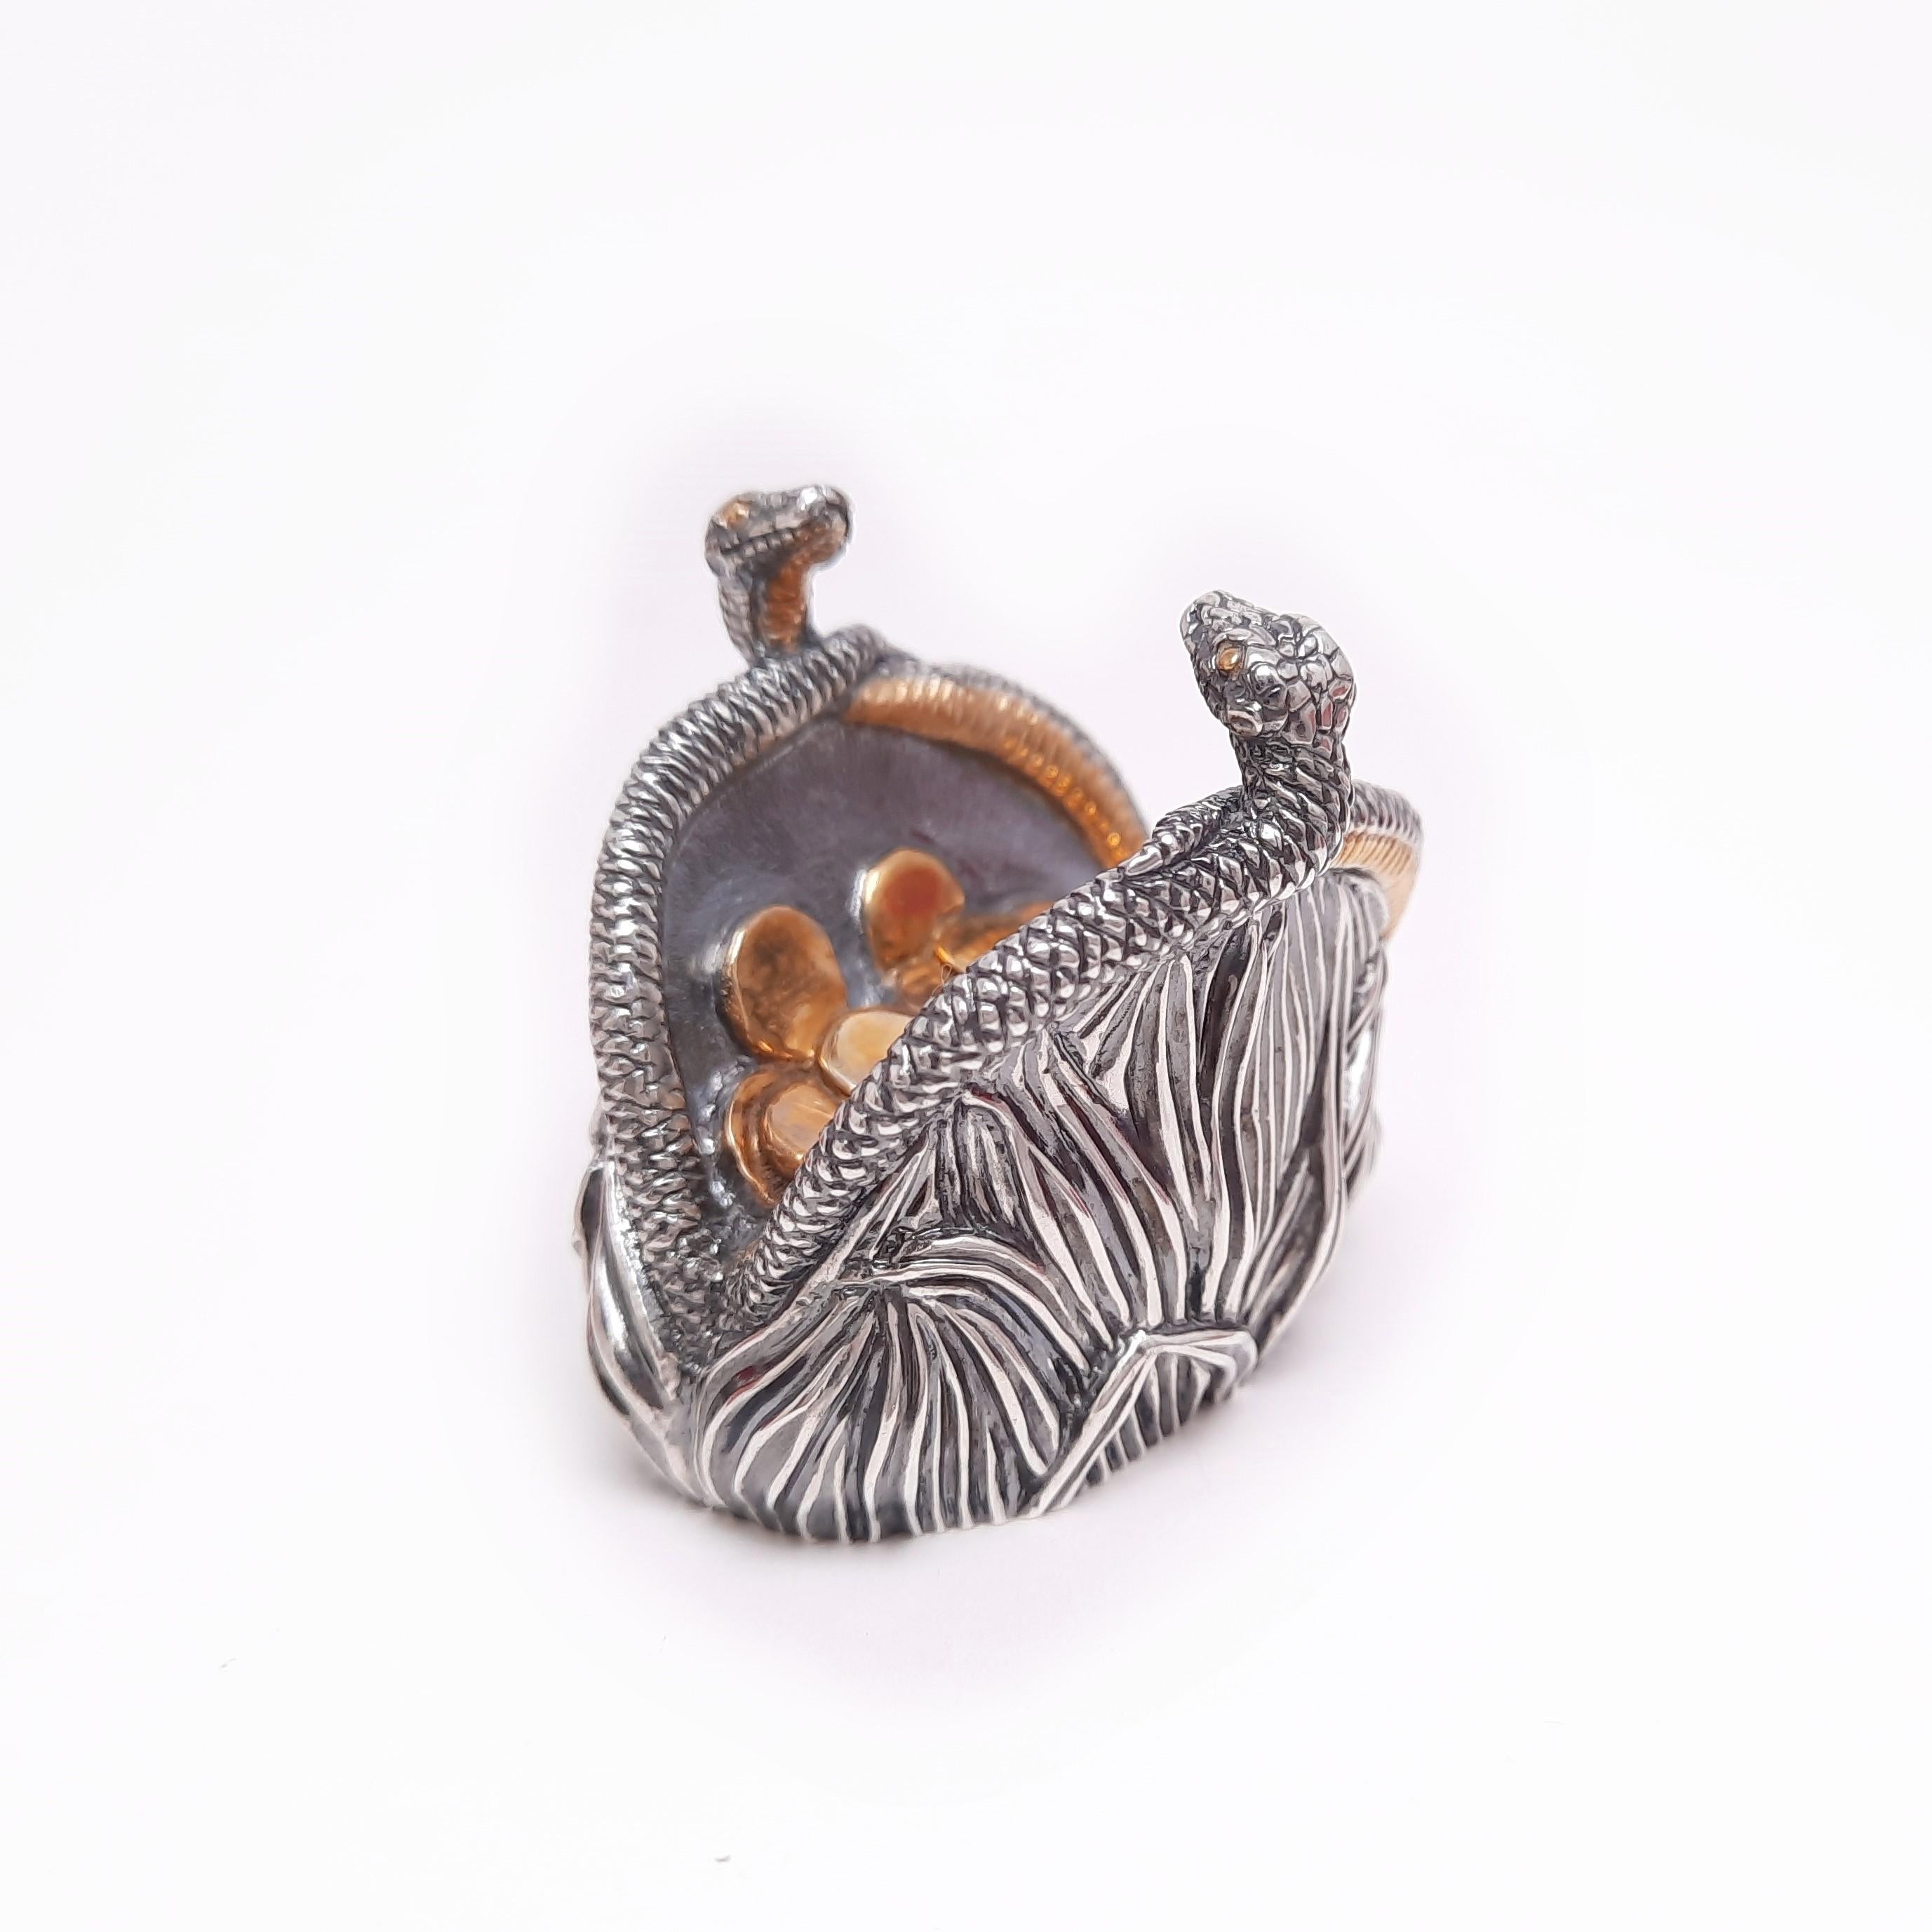 MOISEIKIN's animal miniature is unique and creative in the idea. This Genuine Silver Snake Fortune Purse is full of leaf engravings that embody the Snake protecting the treasure. Being a symbol of luck and wealth as well as healing, Snake has been